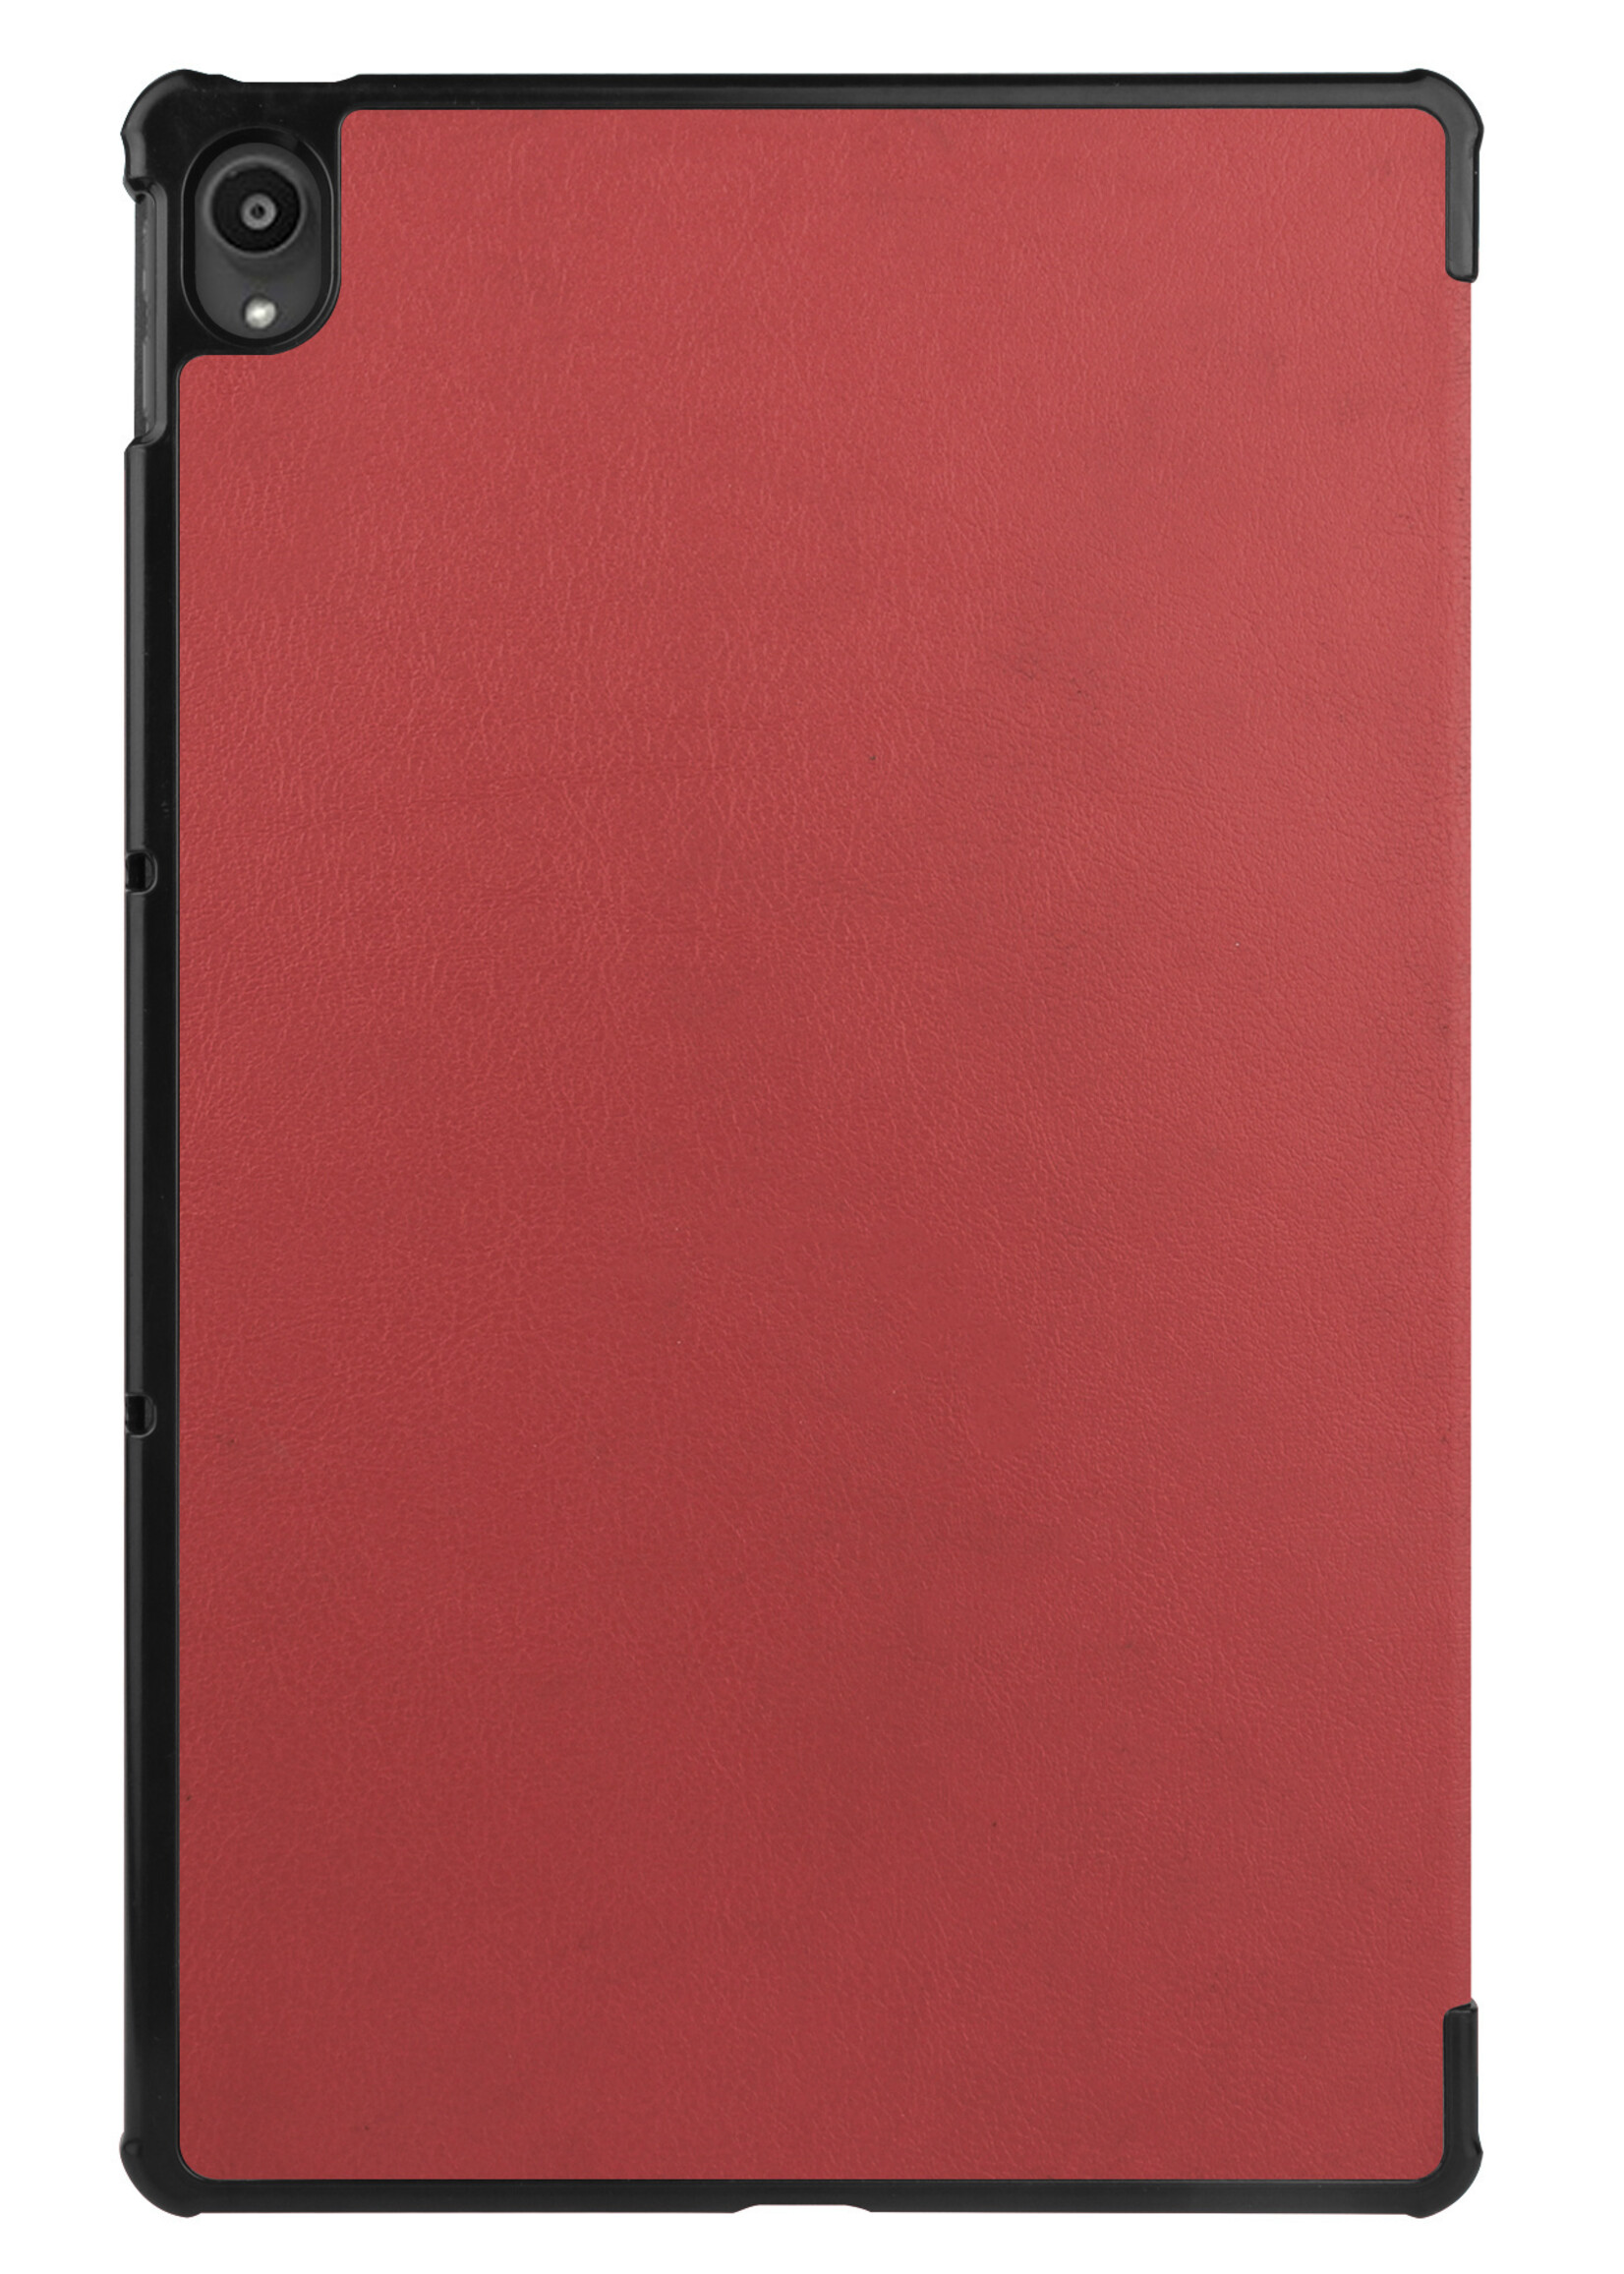 BTH Lenovo Tab P11 Plus Hoes Luxe Book Case Hoesje - Lenovo Tab P11 Plus Hoes Cover (11 inch) - Donker Rood